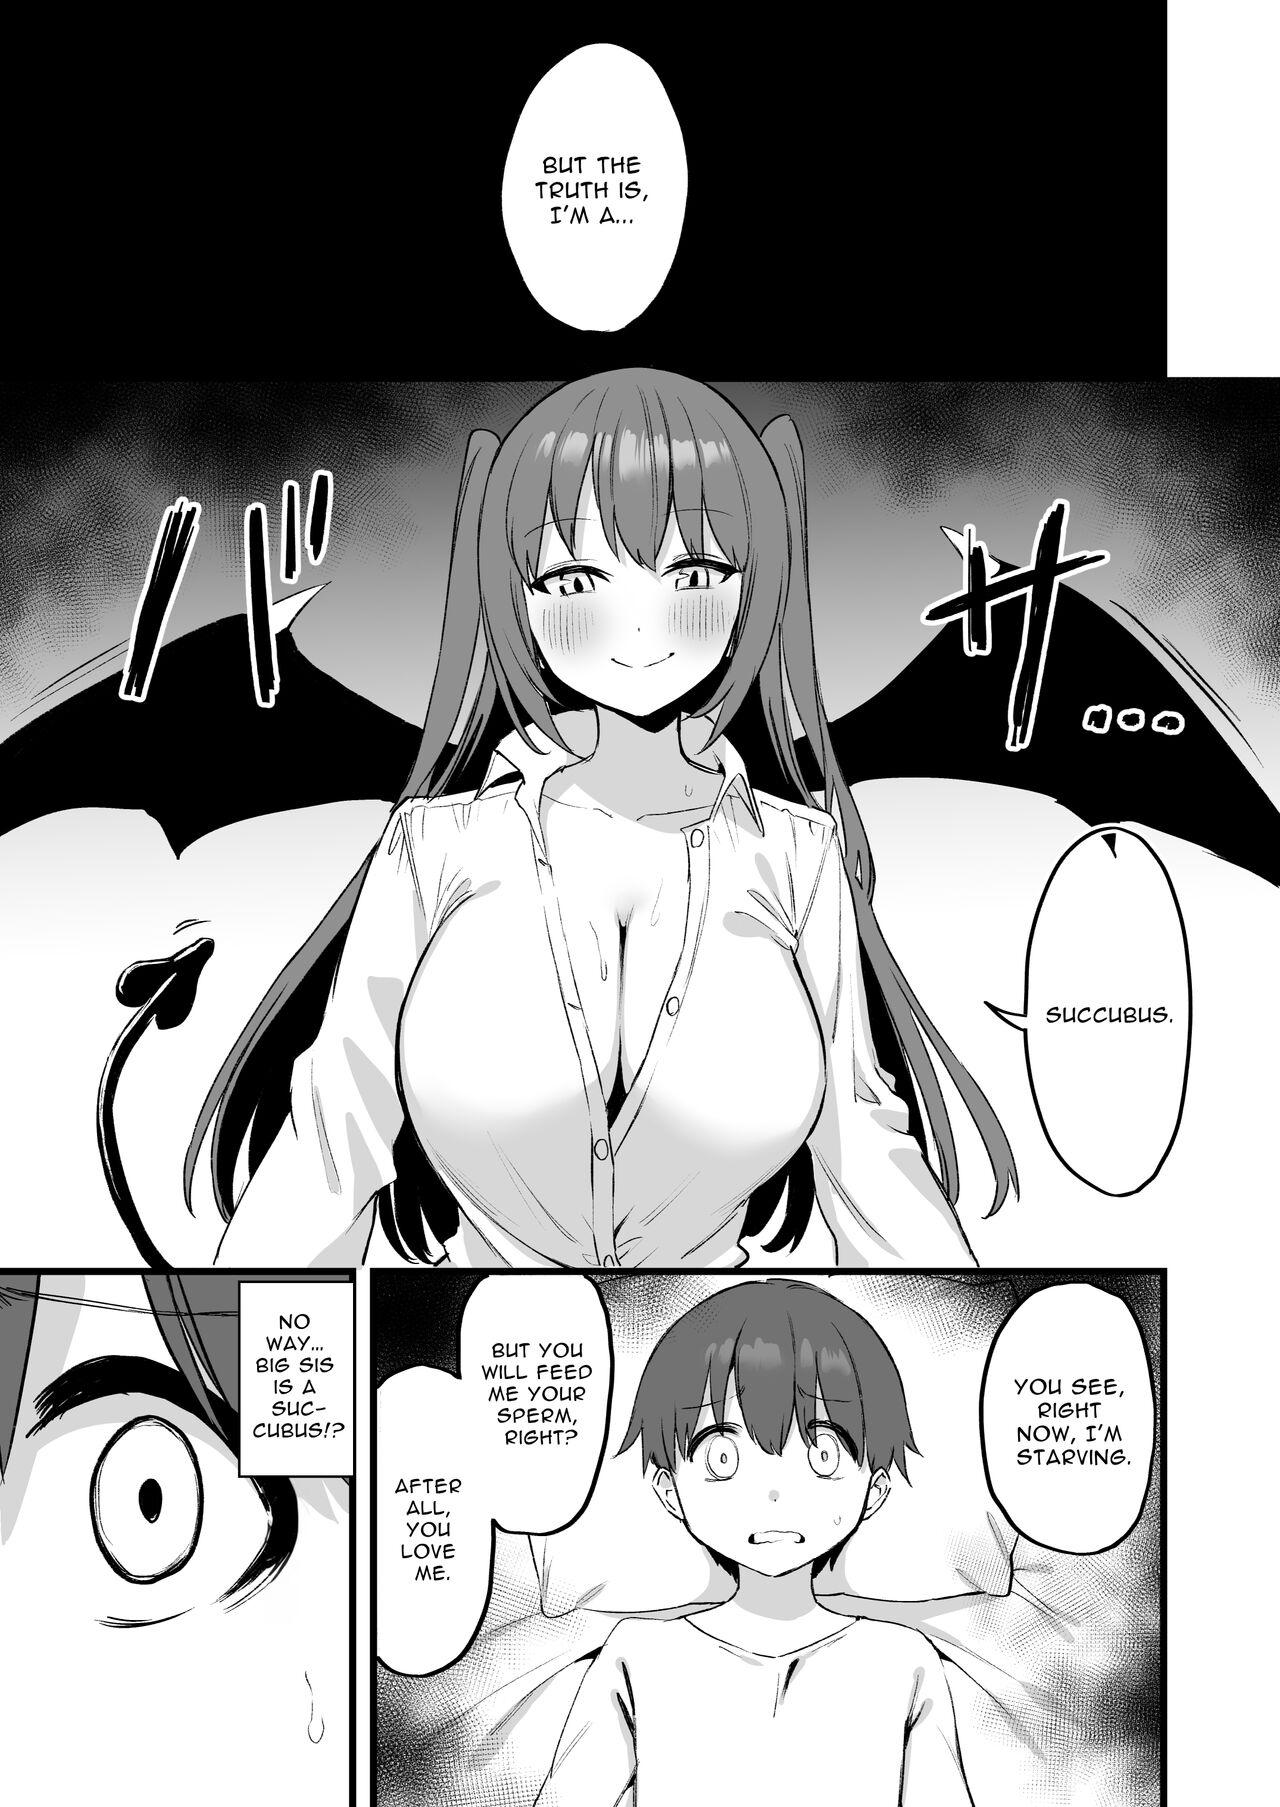 Gay Shorthair Onee-chan wa Succubus!? | The Older Girl In My Neighborhood Is A Succubus!? - Original Deflowered - Page 6